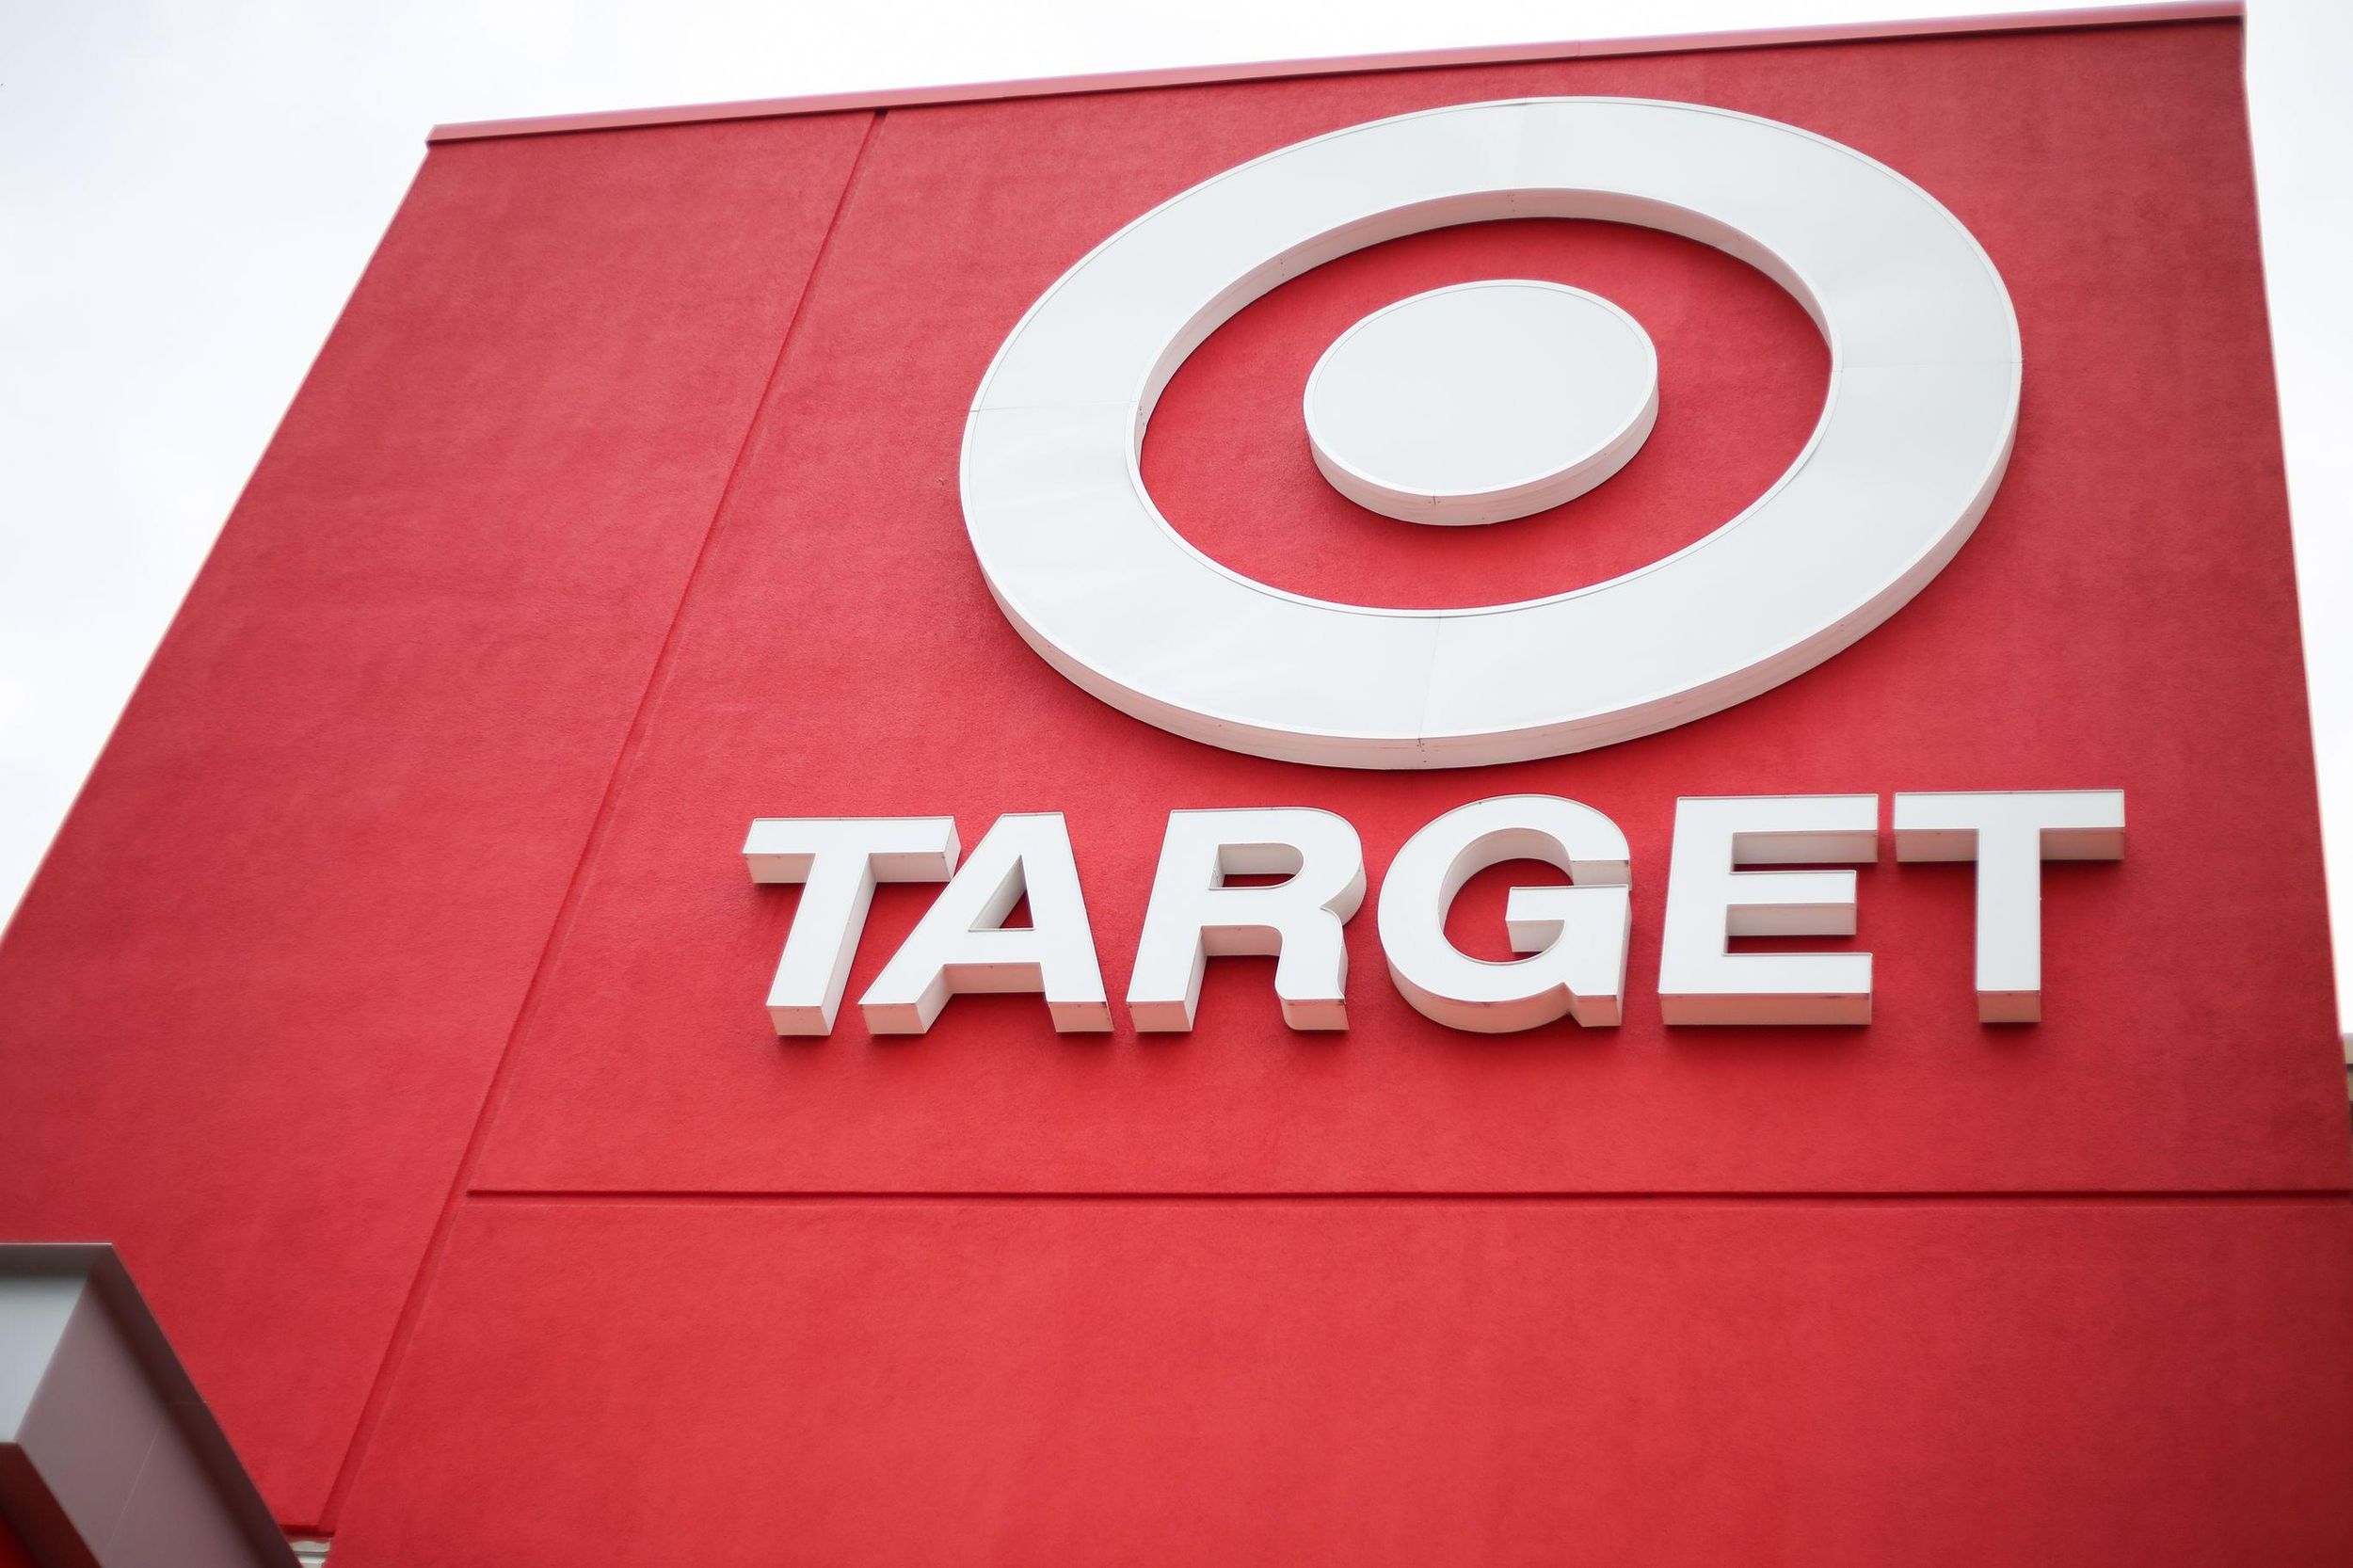 Target pushes suppliers to go green, too | The Spokesman-Review